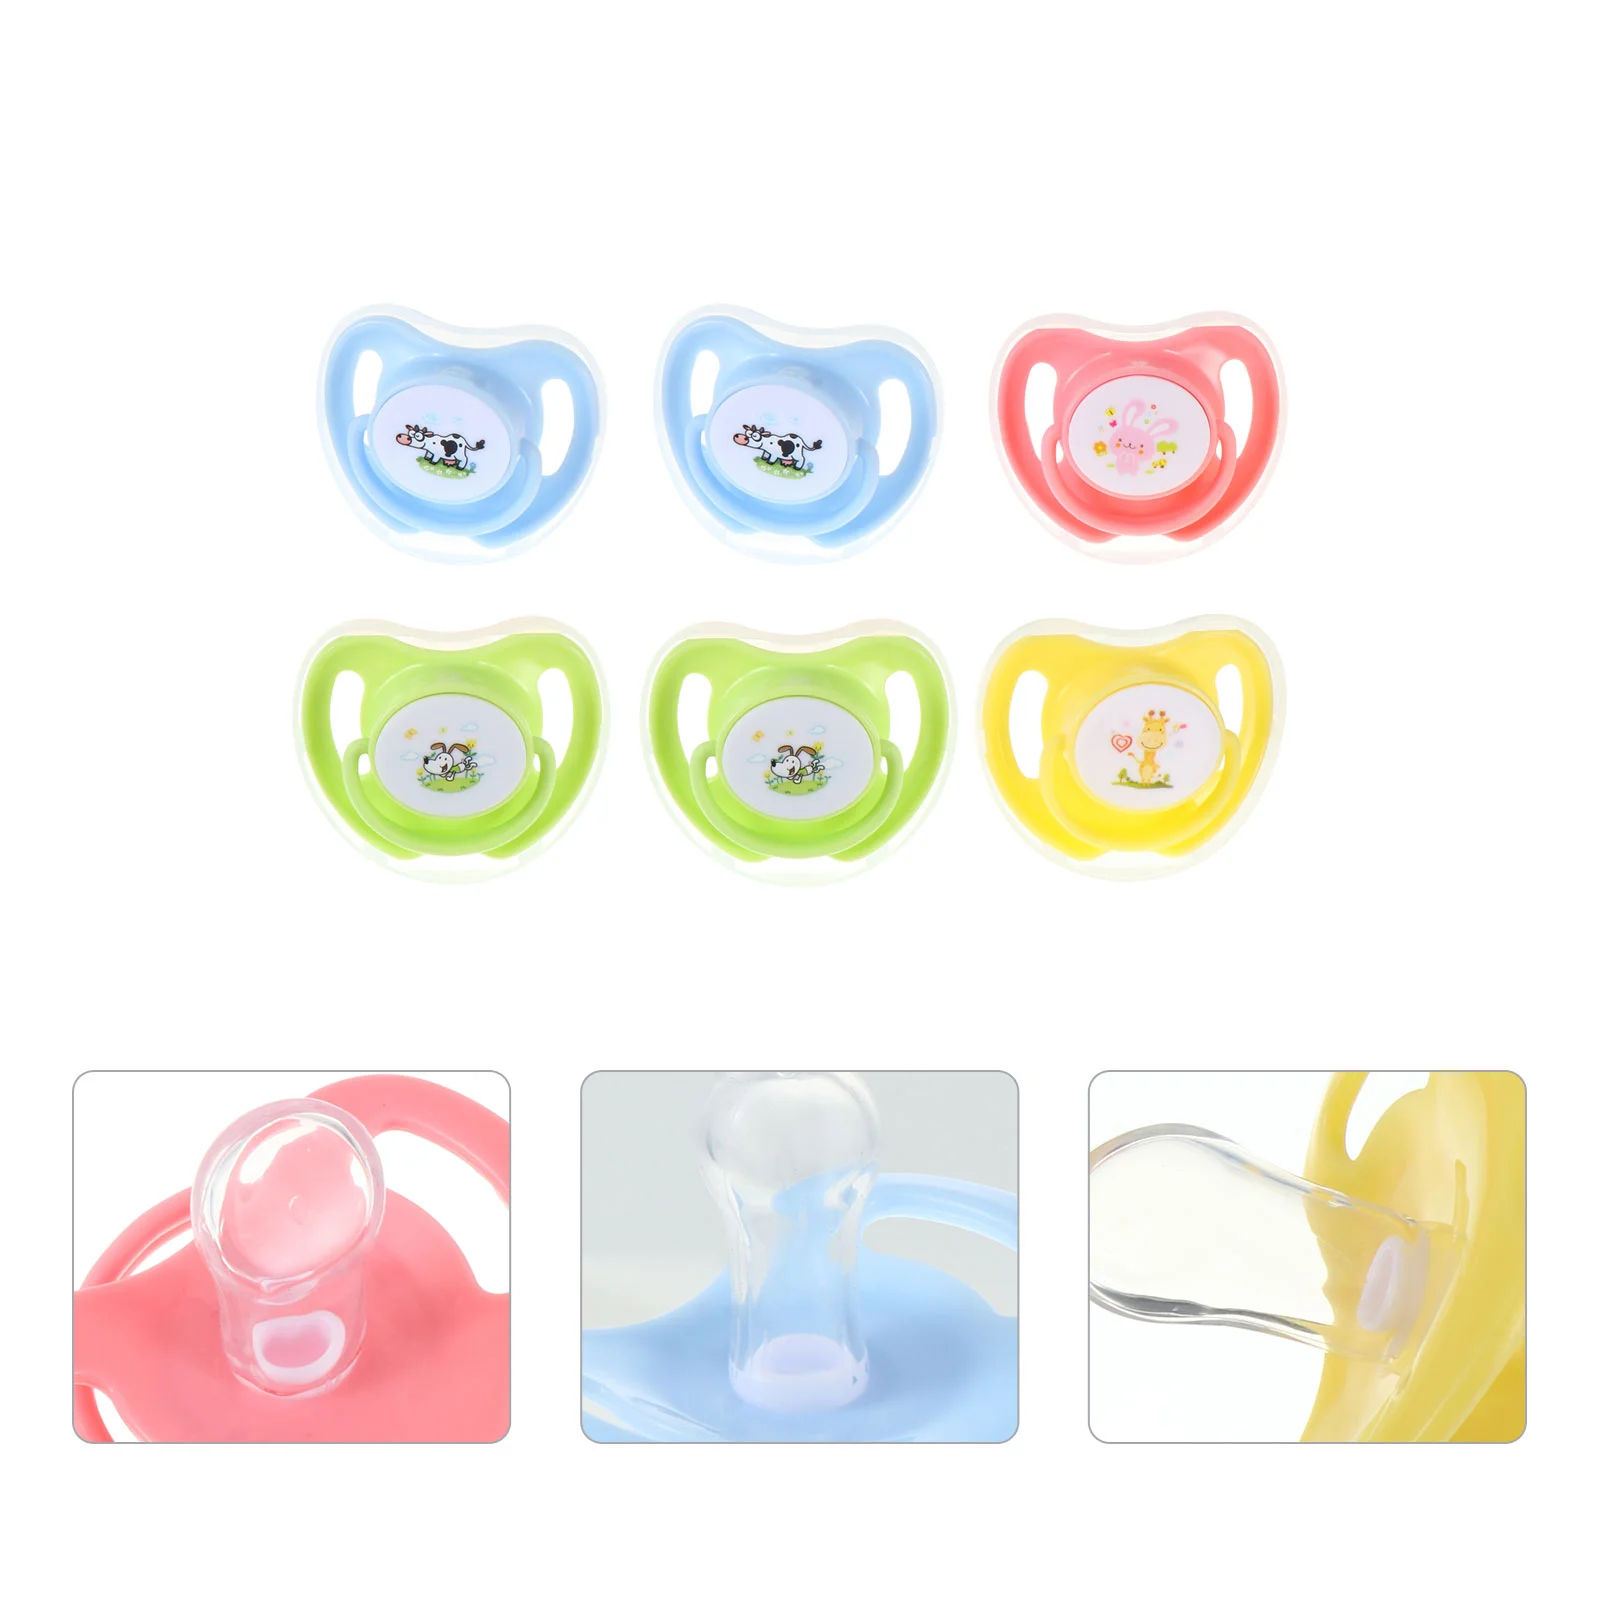 

6pcs Chic Cartoon Delicate Stylish Baby Teether Toys Newborns Sleep Soothers Teether Pacifiers Silicone Pacifiers for Infant